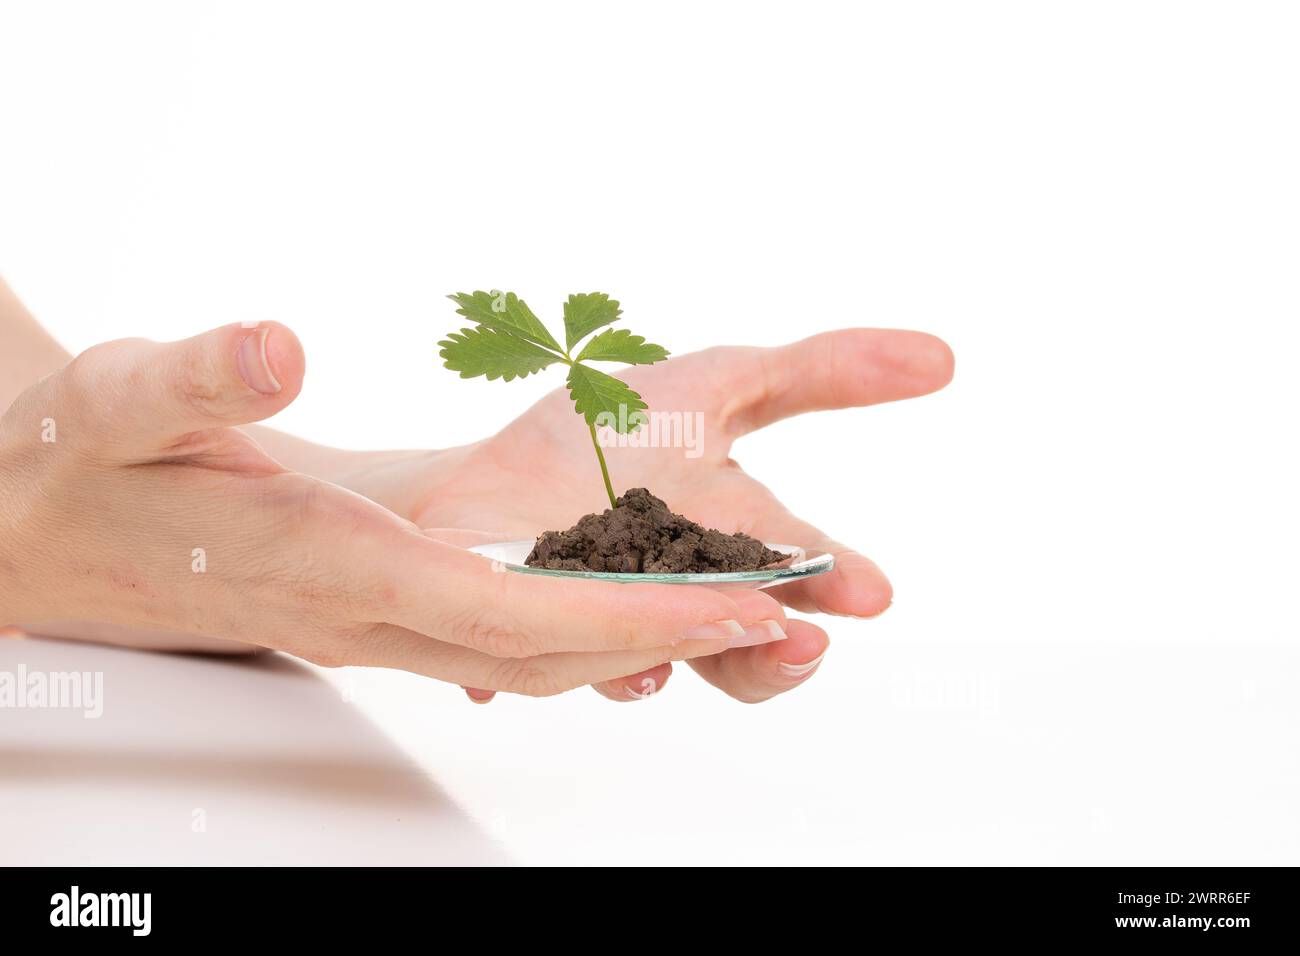 Hands carefully holding a glass slide with soil and a young plant, representing biotechnology research and cellular study in plant science against a w Stock Photo